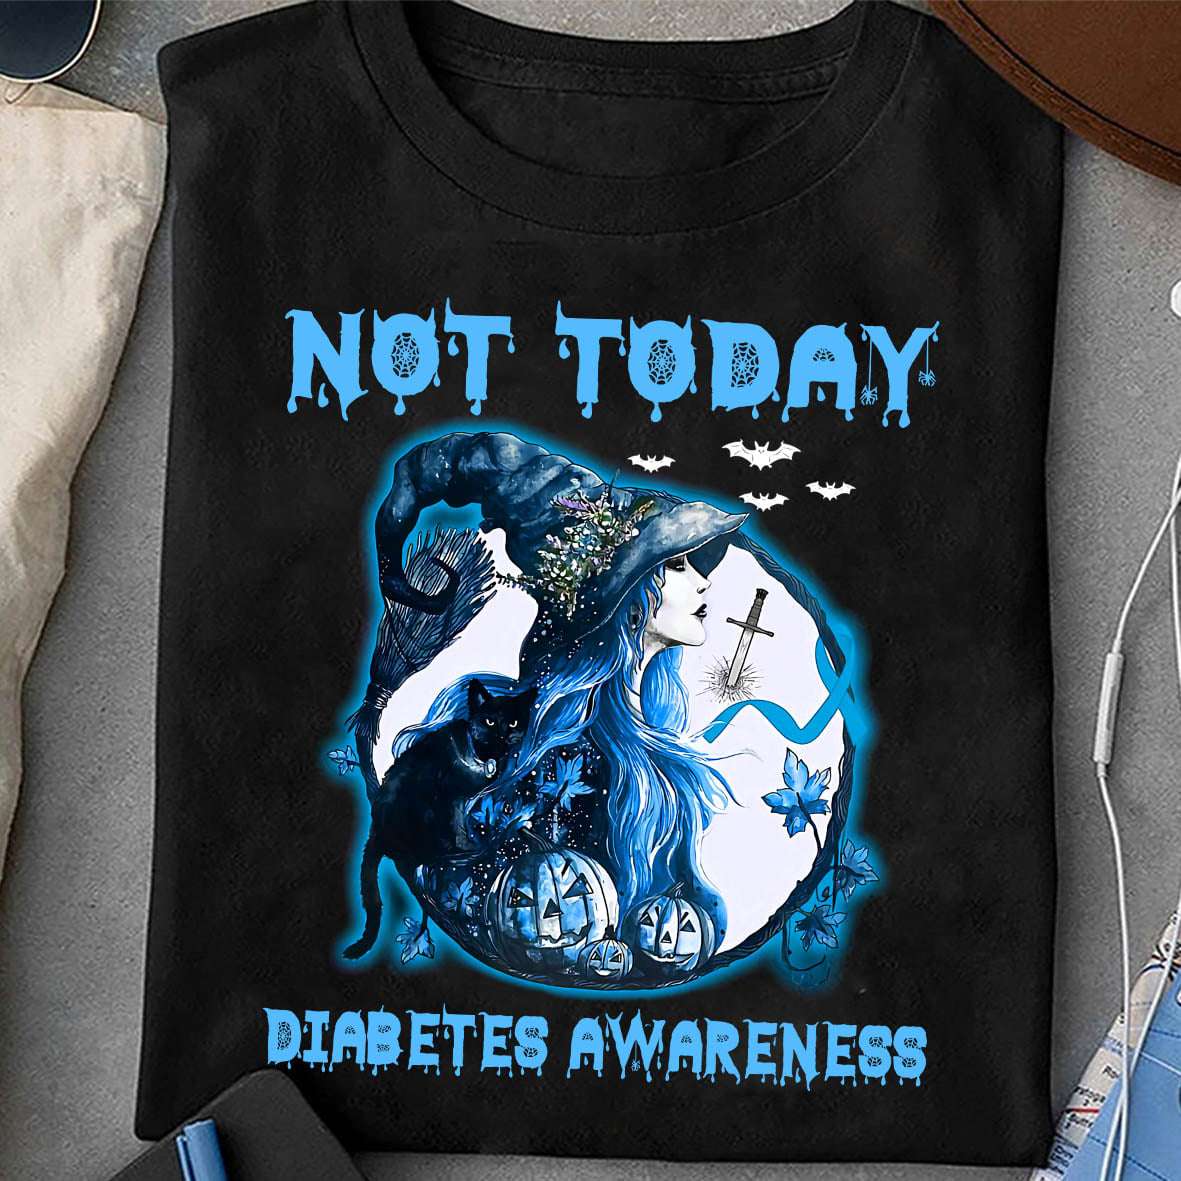 Not today - Diabetes awareness, Halloween witch costume, Diabetic Witch